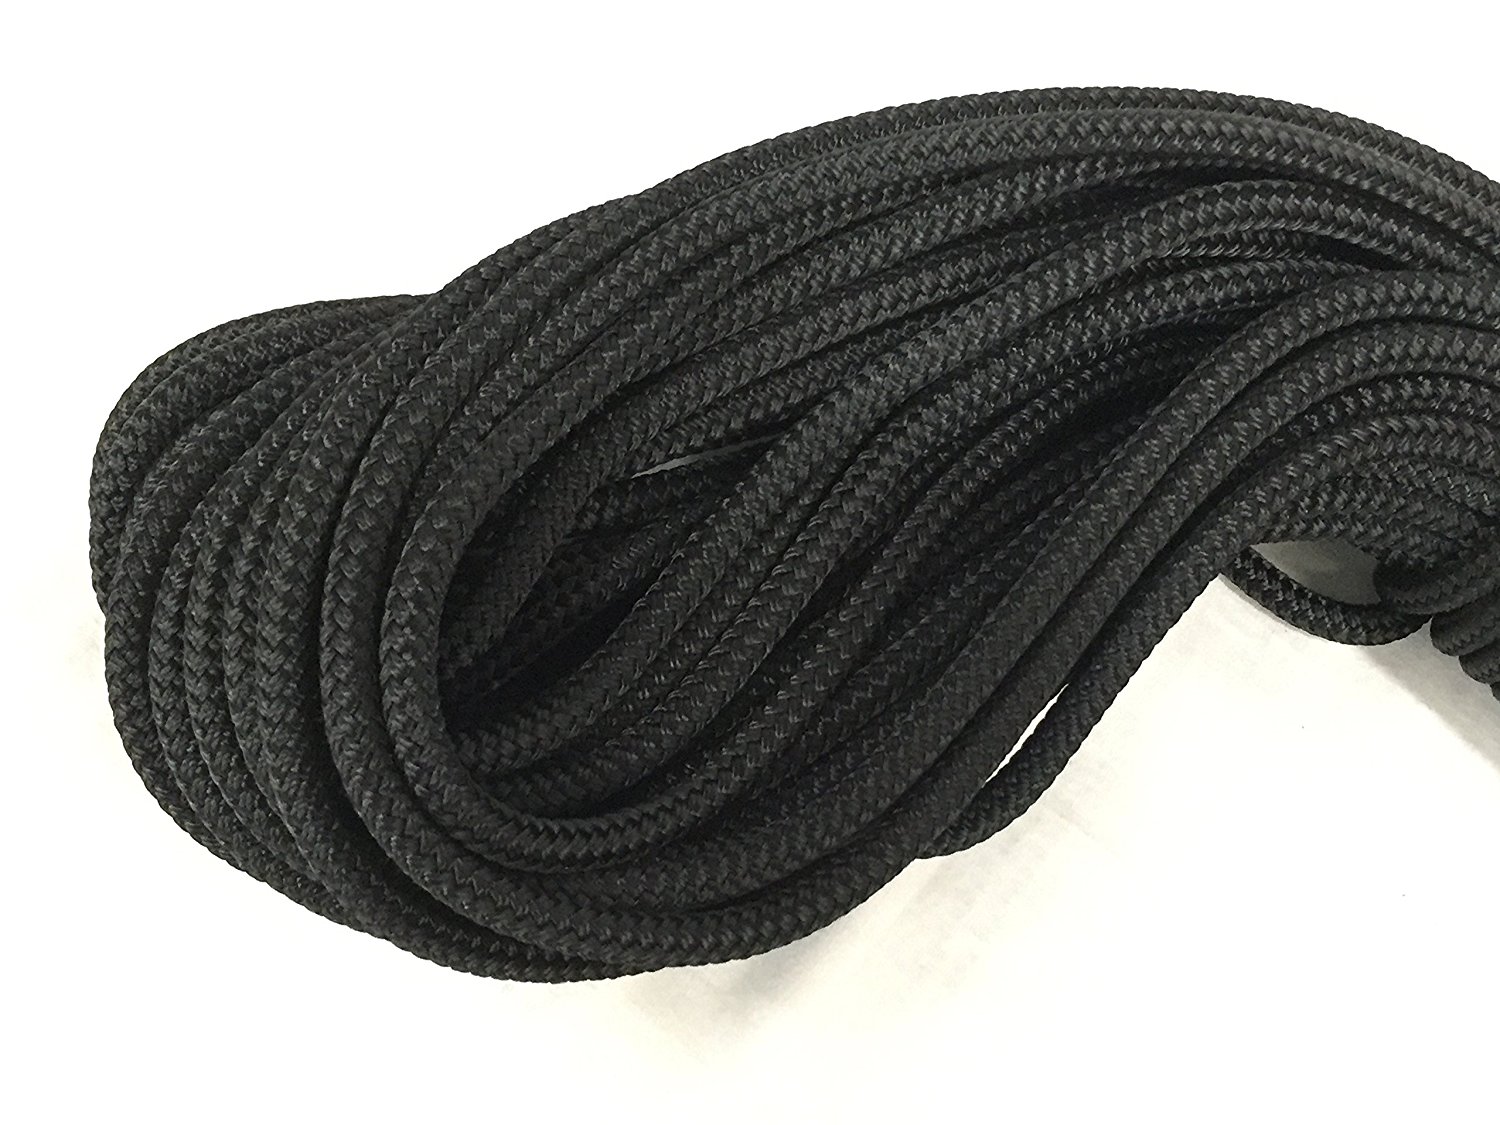 Valley Rope 1/4 Premium Double-Yacht Braid Polyester Rope Made in The U.S.A. Sailboat Rigging Line 